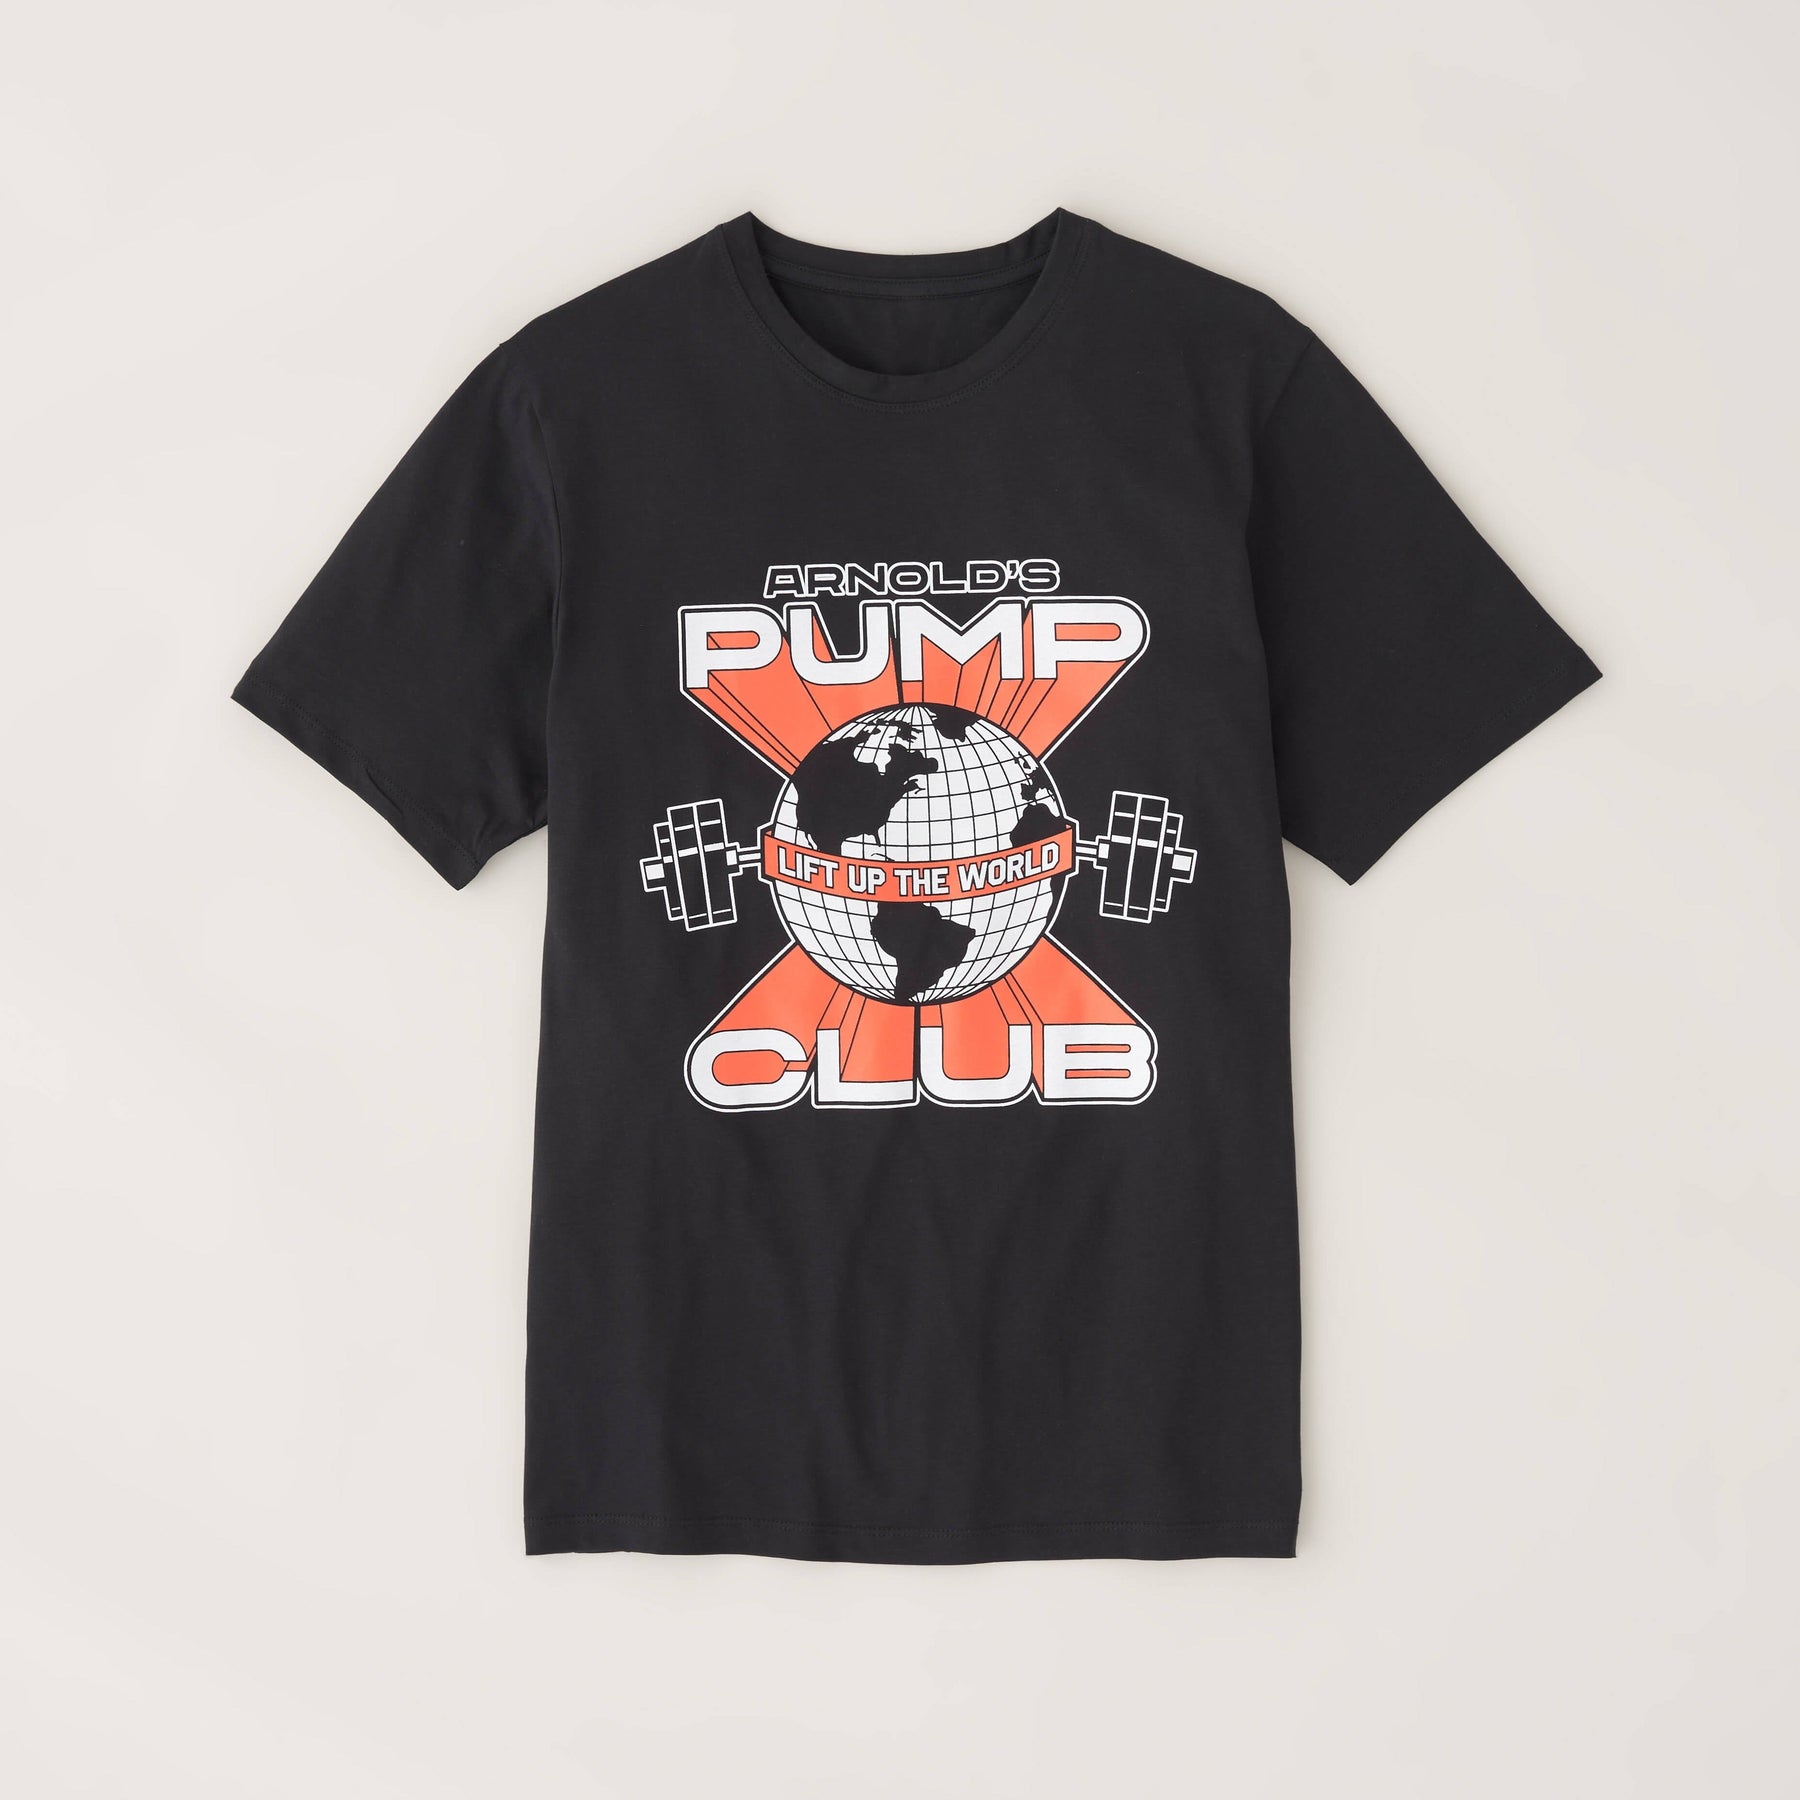 The Official Arnold's Pump Club T-Shirt